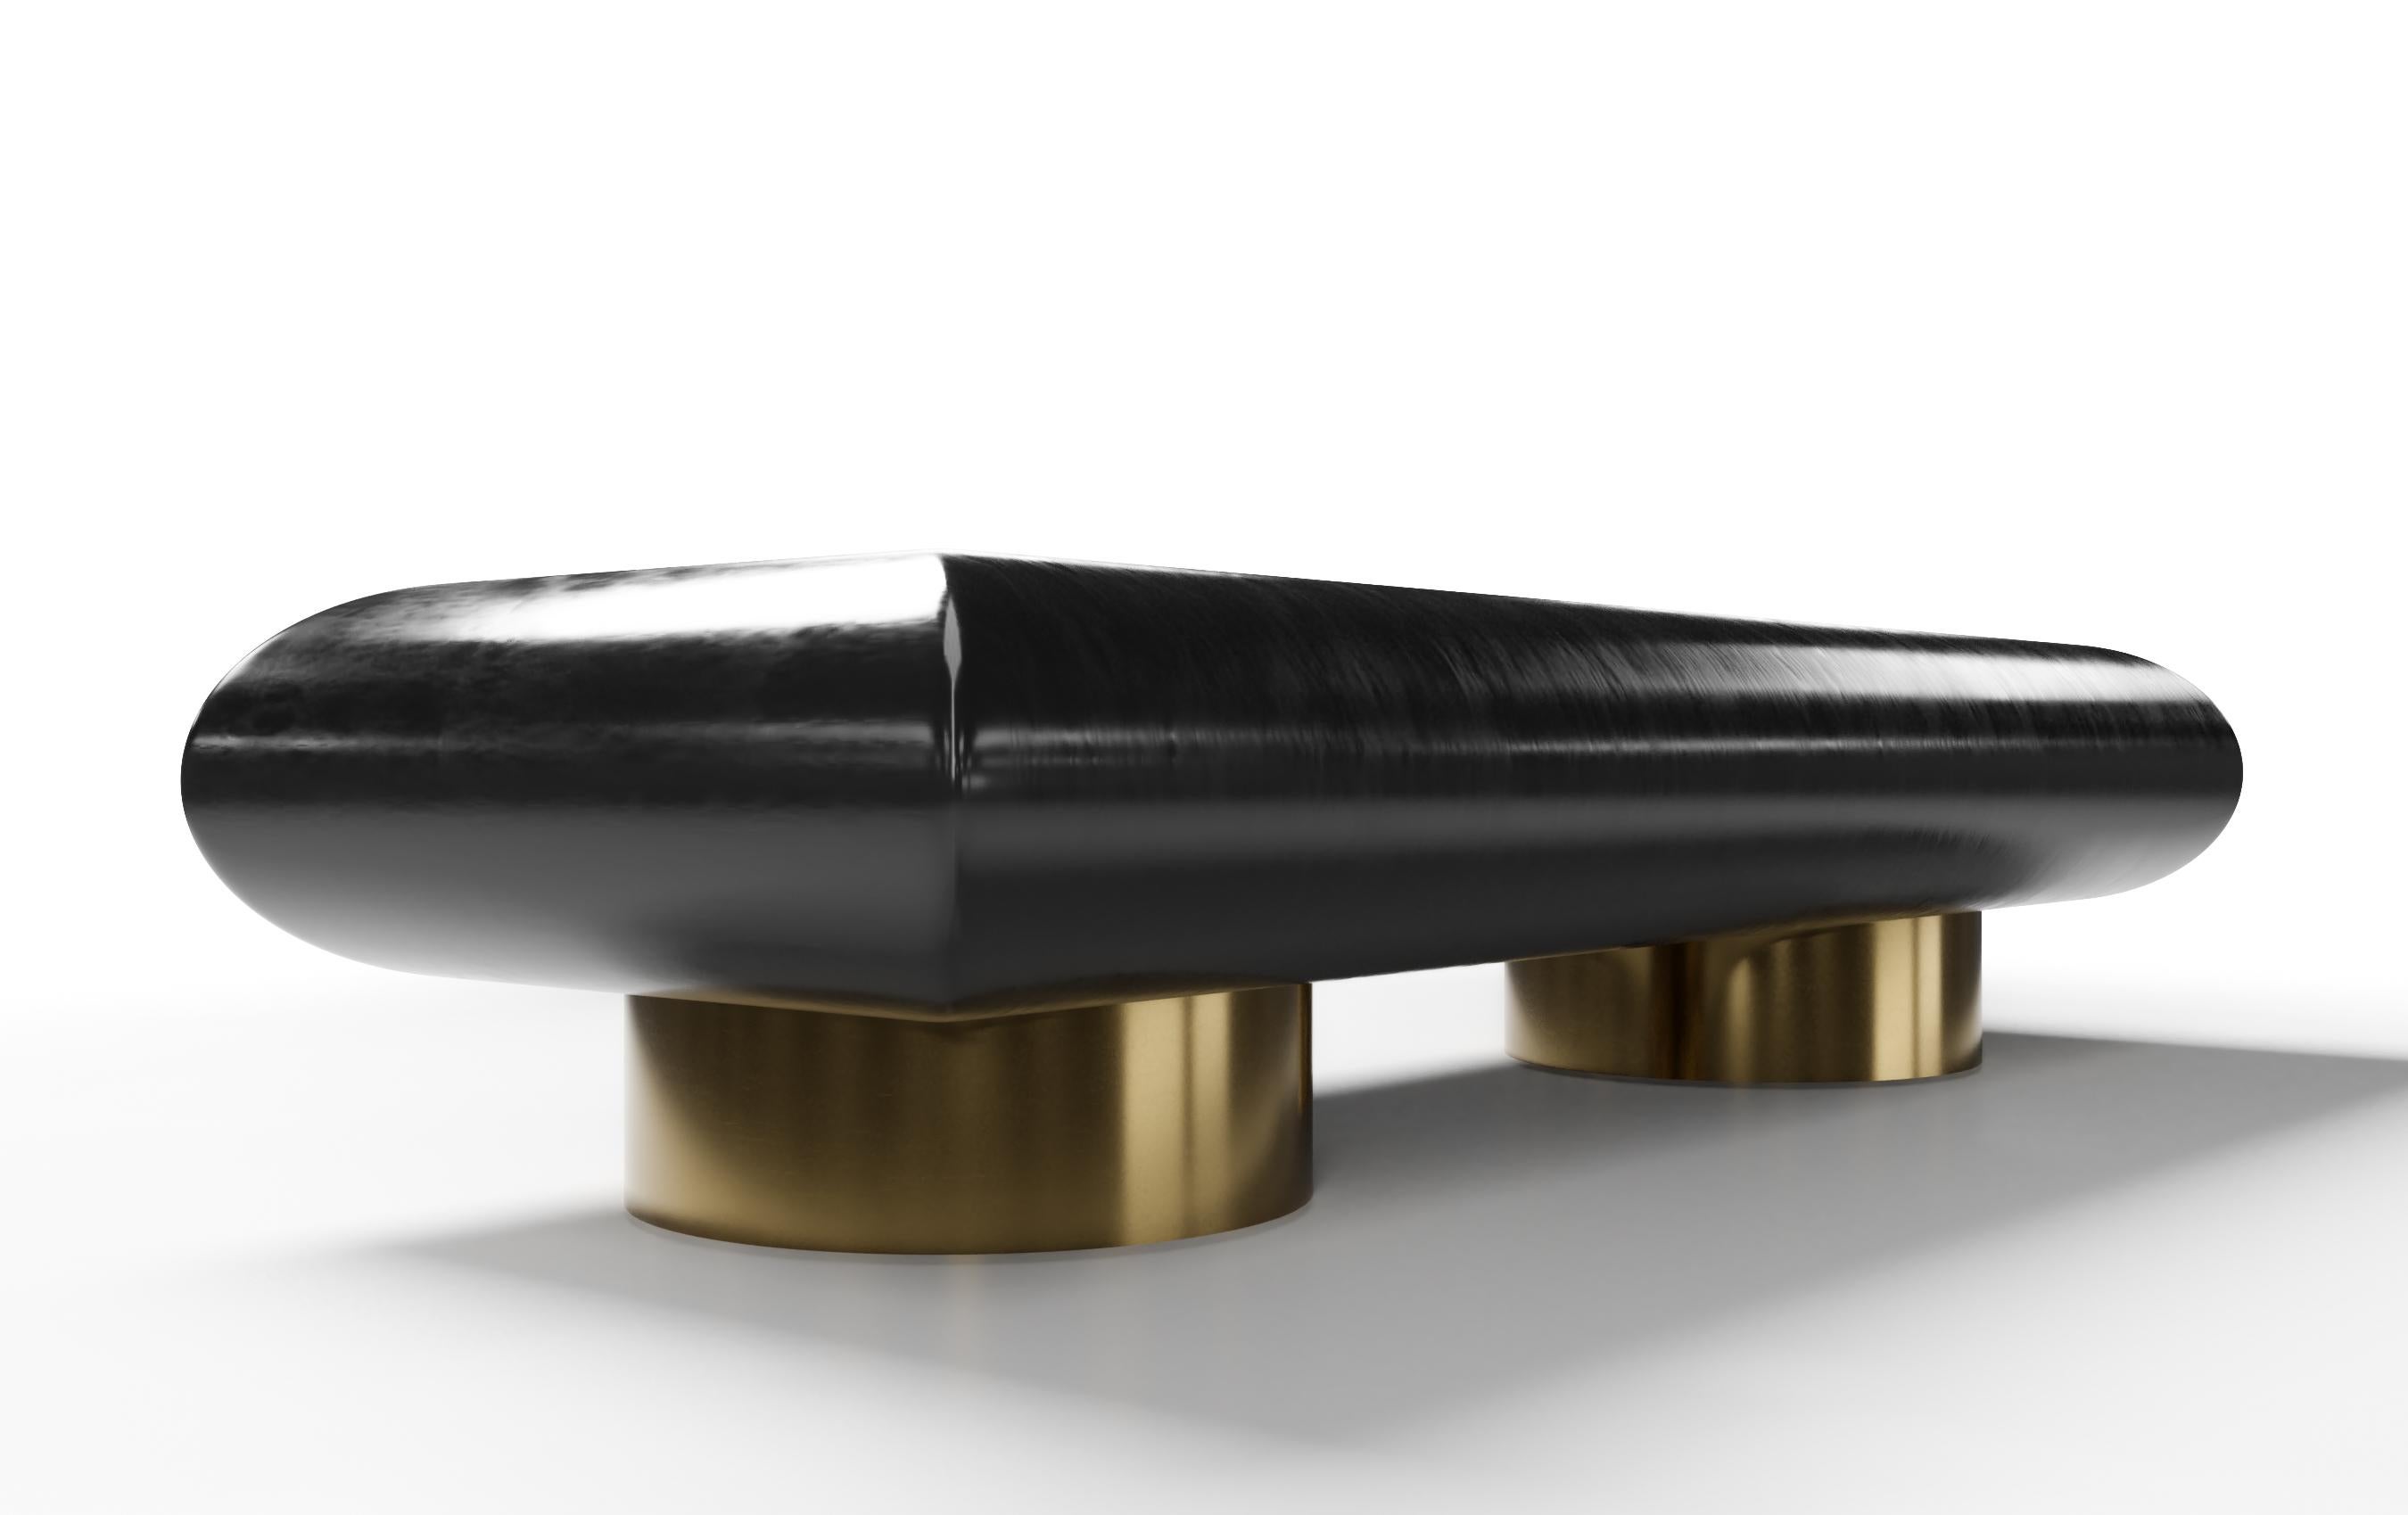 Italian CARMEL COFFEE TABLE - Modern Coffee Table in a Black Lacquer and a Bronze Base